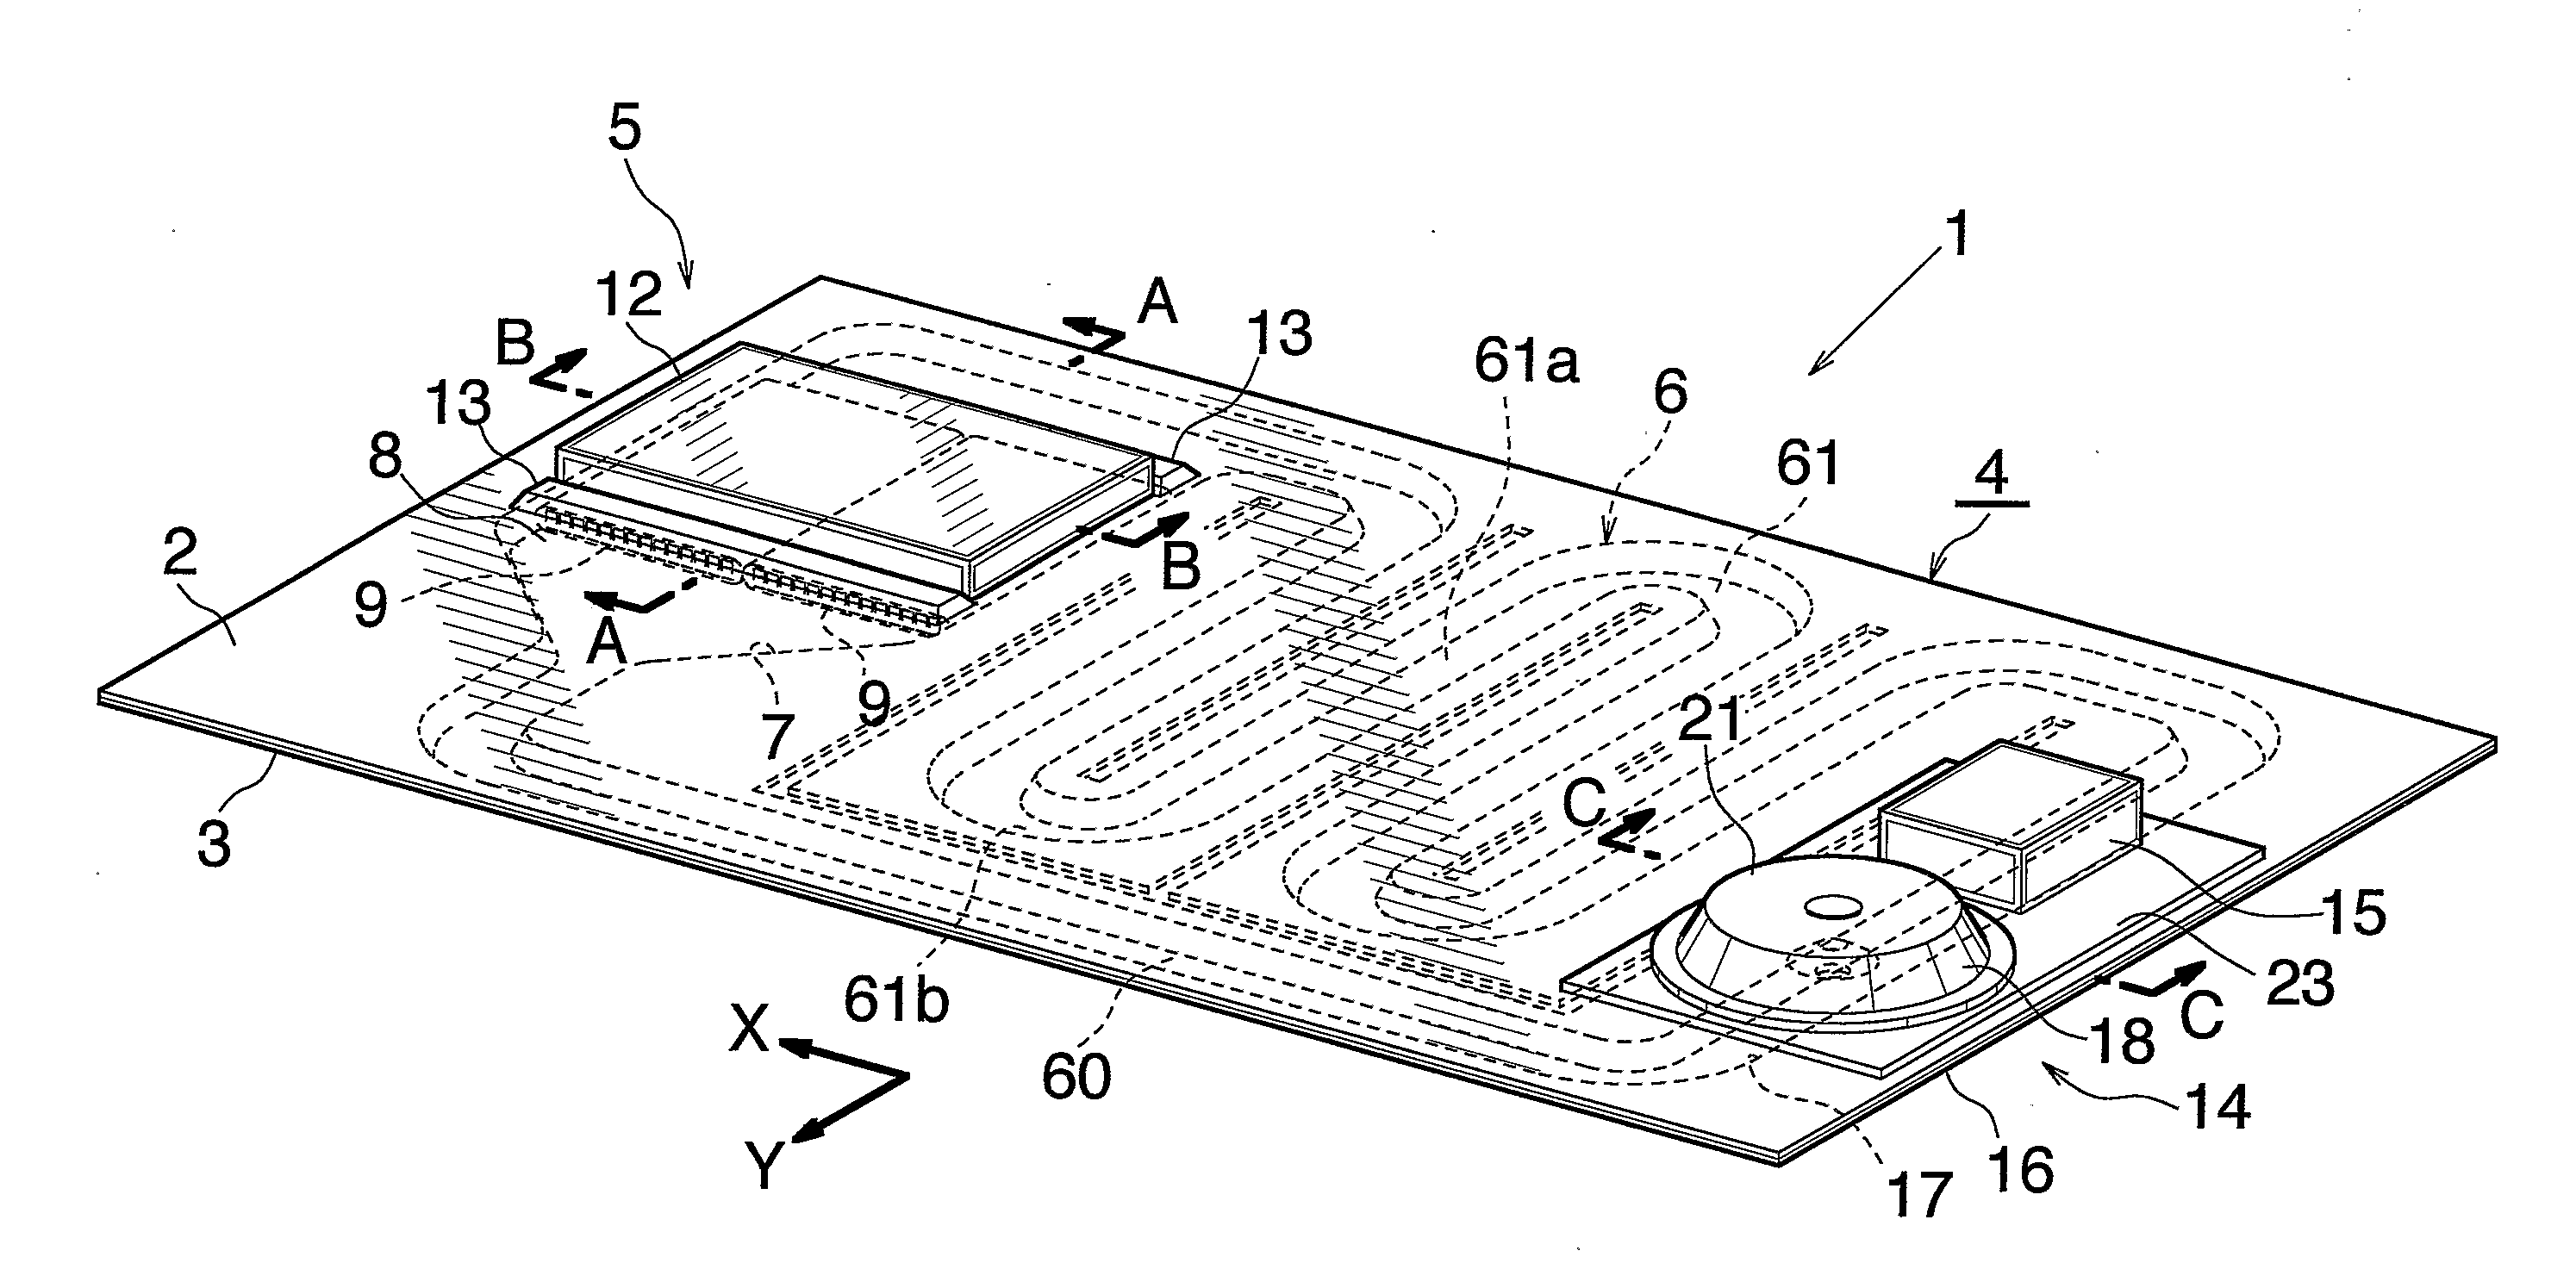 Expansion tank device, process for fabricating expansion tank device, and liquid cooling radiator